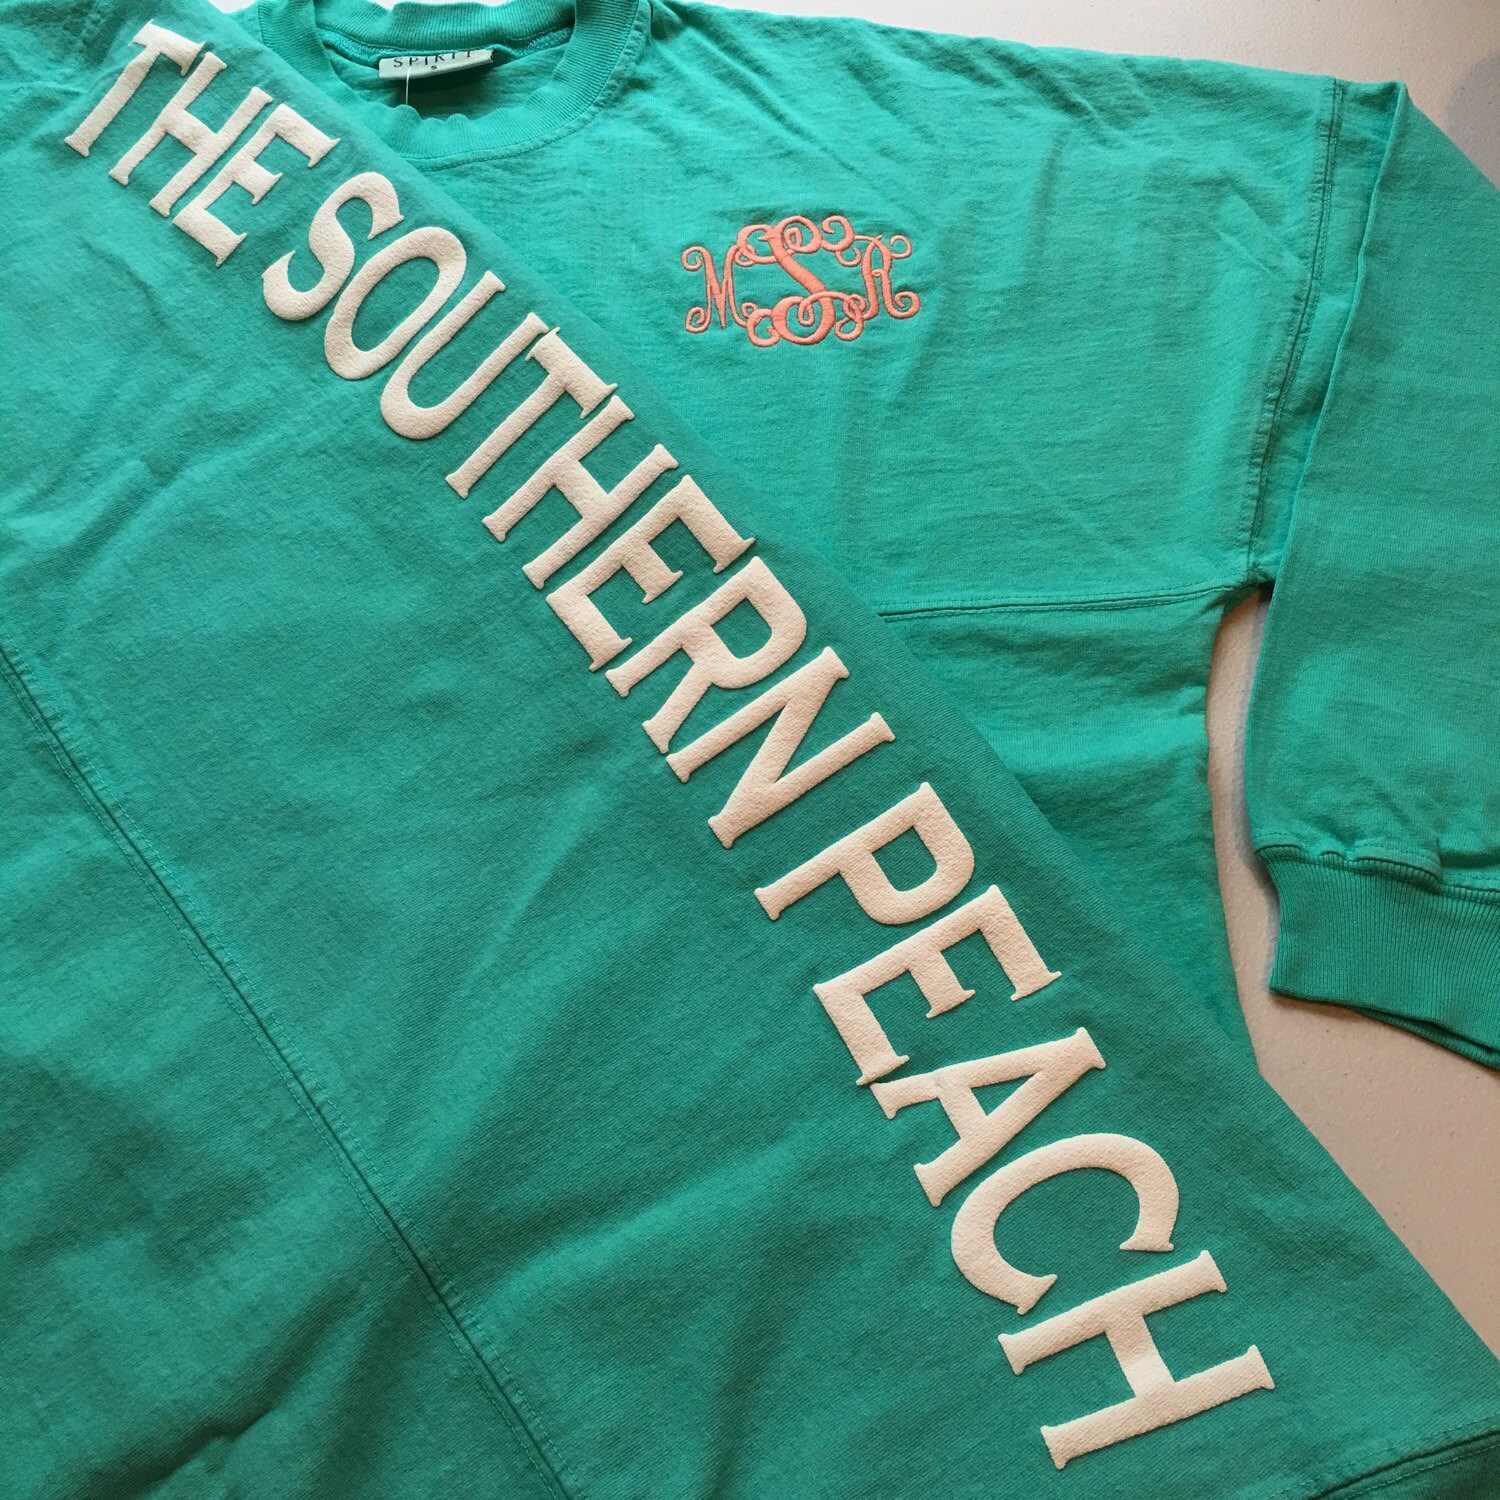 Updates from TheSouthernPeach on Etsy